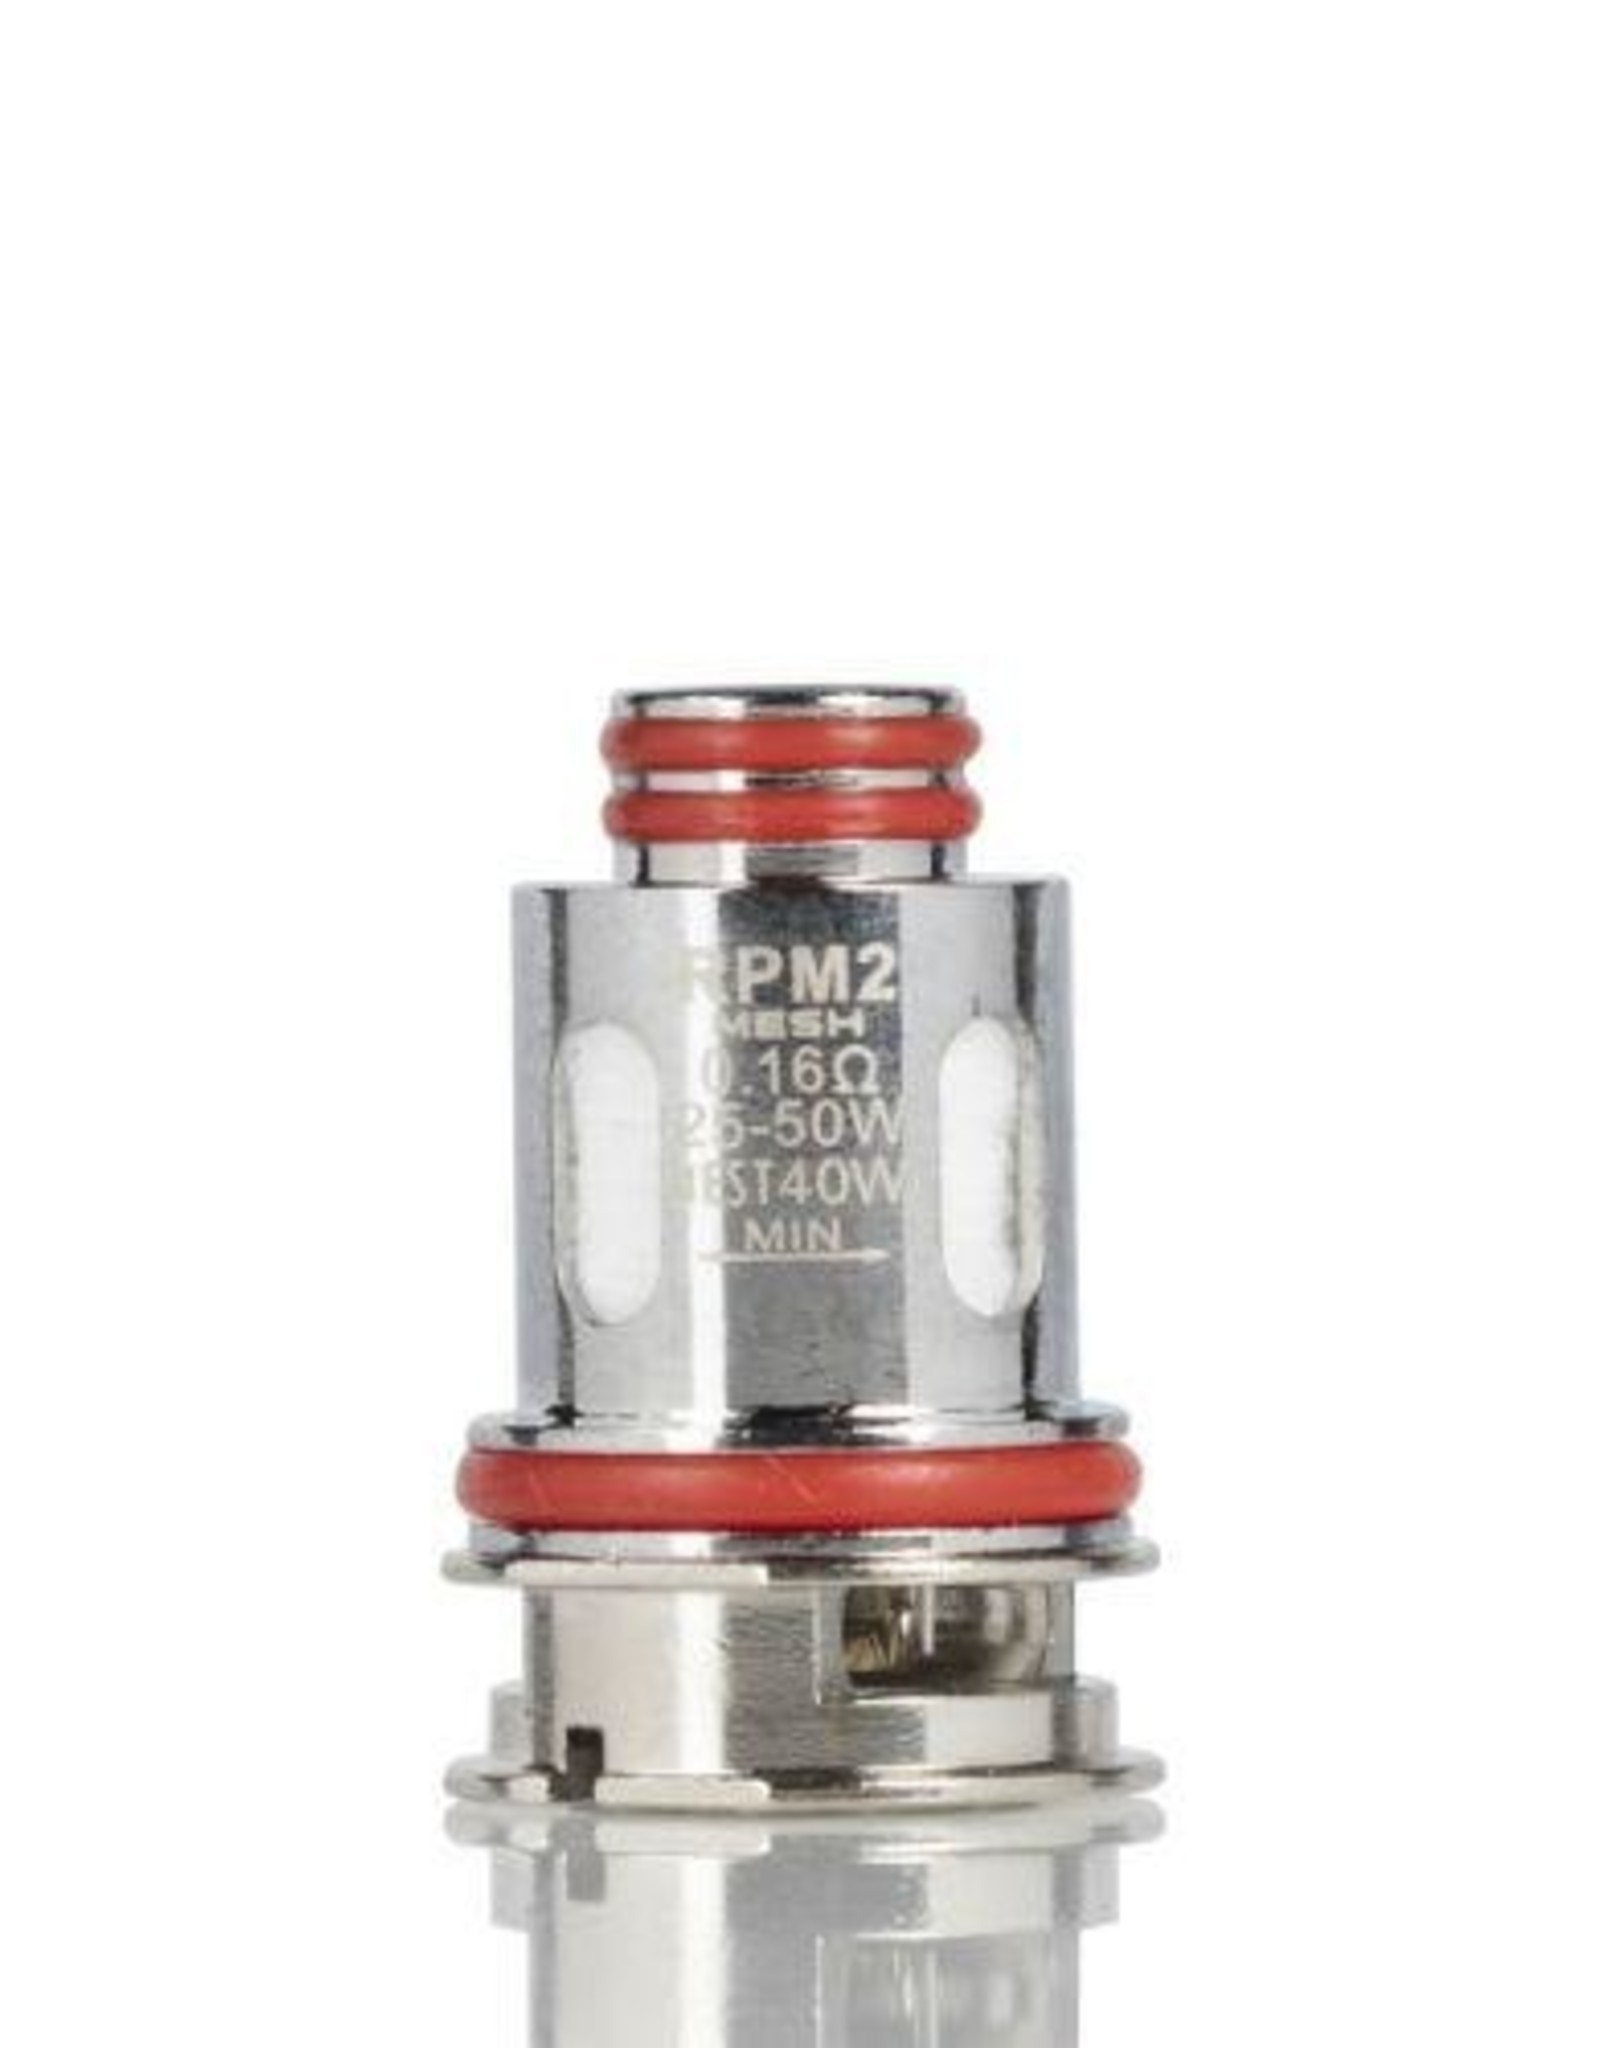 SMOK SMOK RPM2 REPLACEMENT COIL (5 PACK)